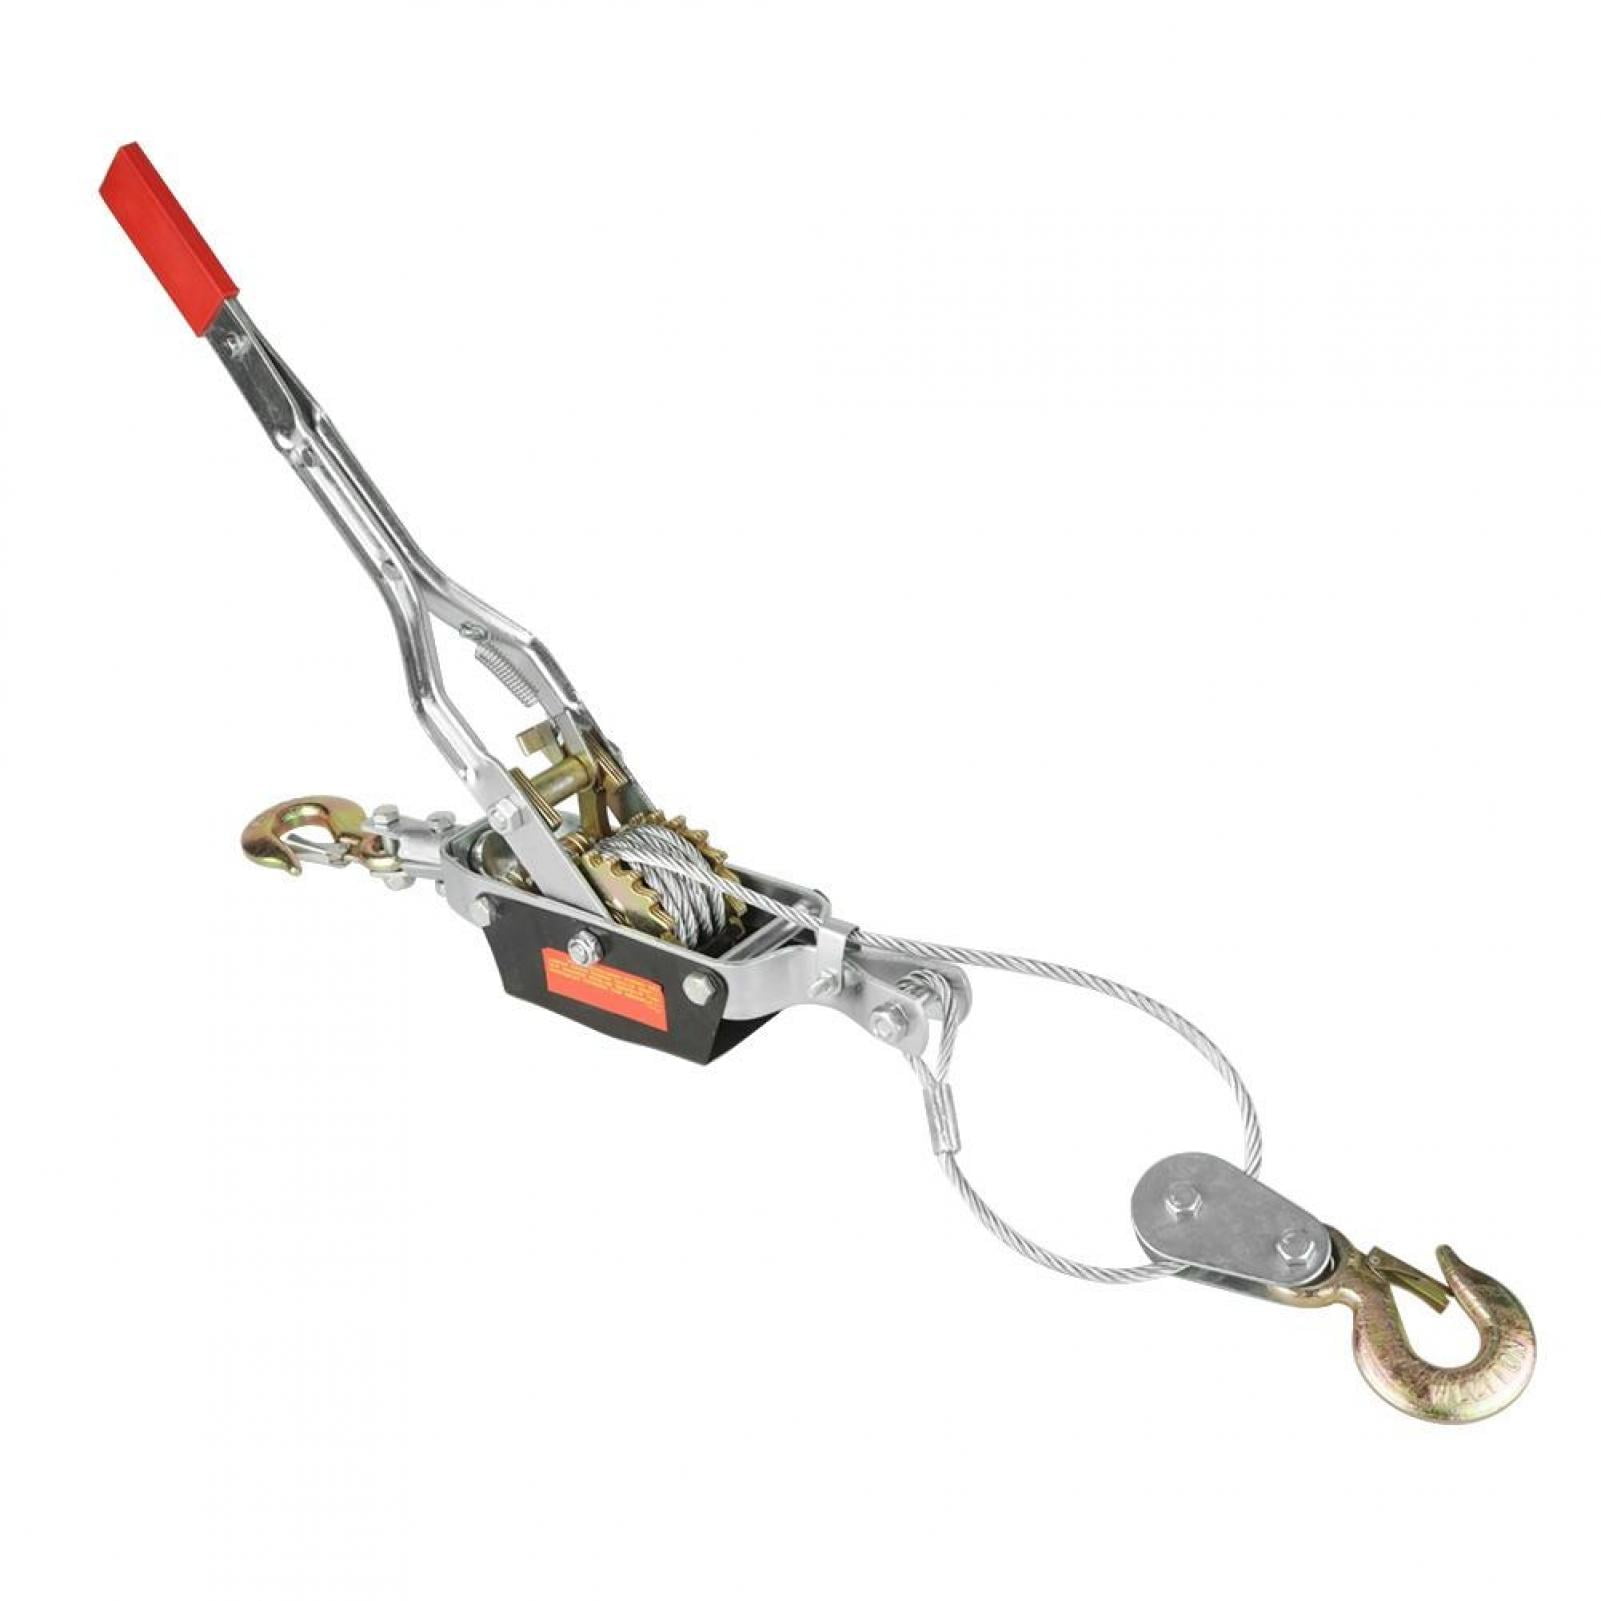 4 Ton Wire Rope Ratchet Hand Power Puller Tool Tightener Double Hook Lift Heavy 